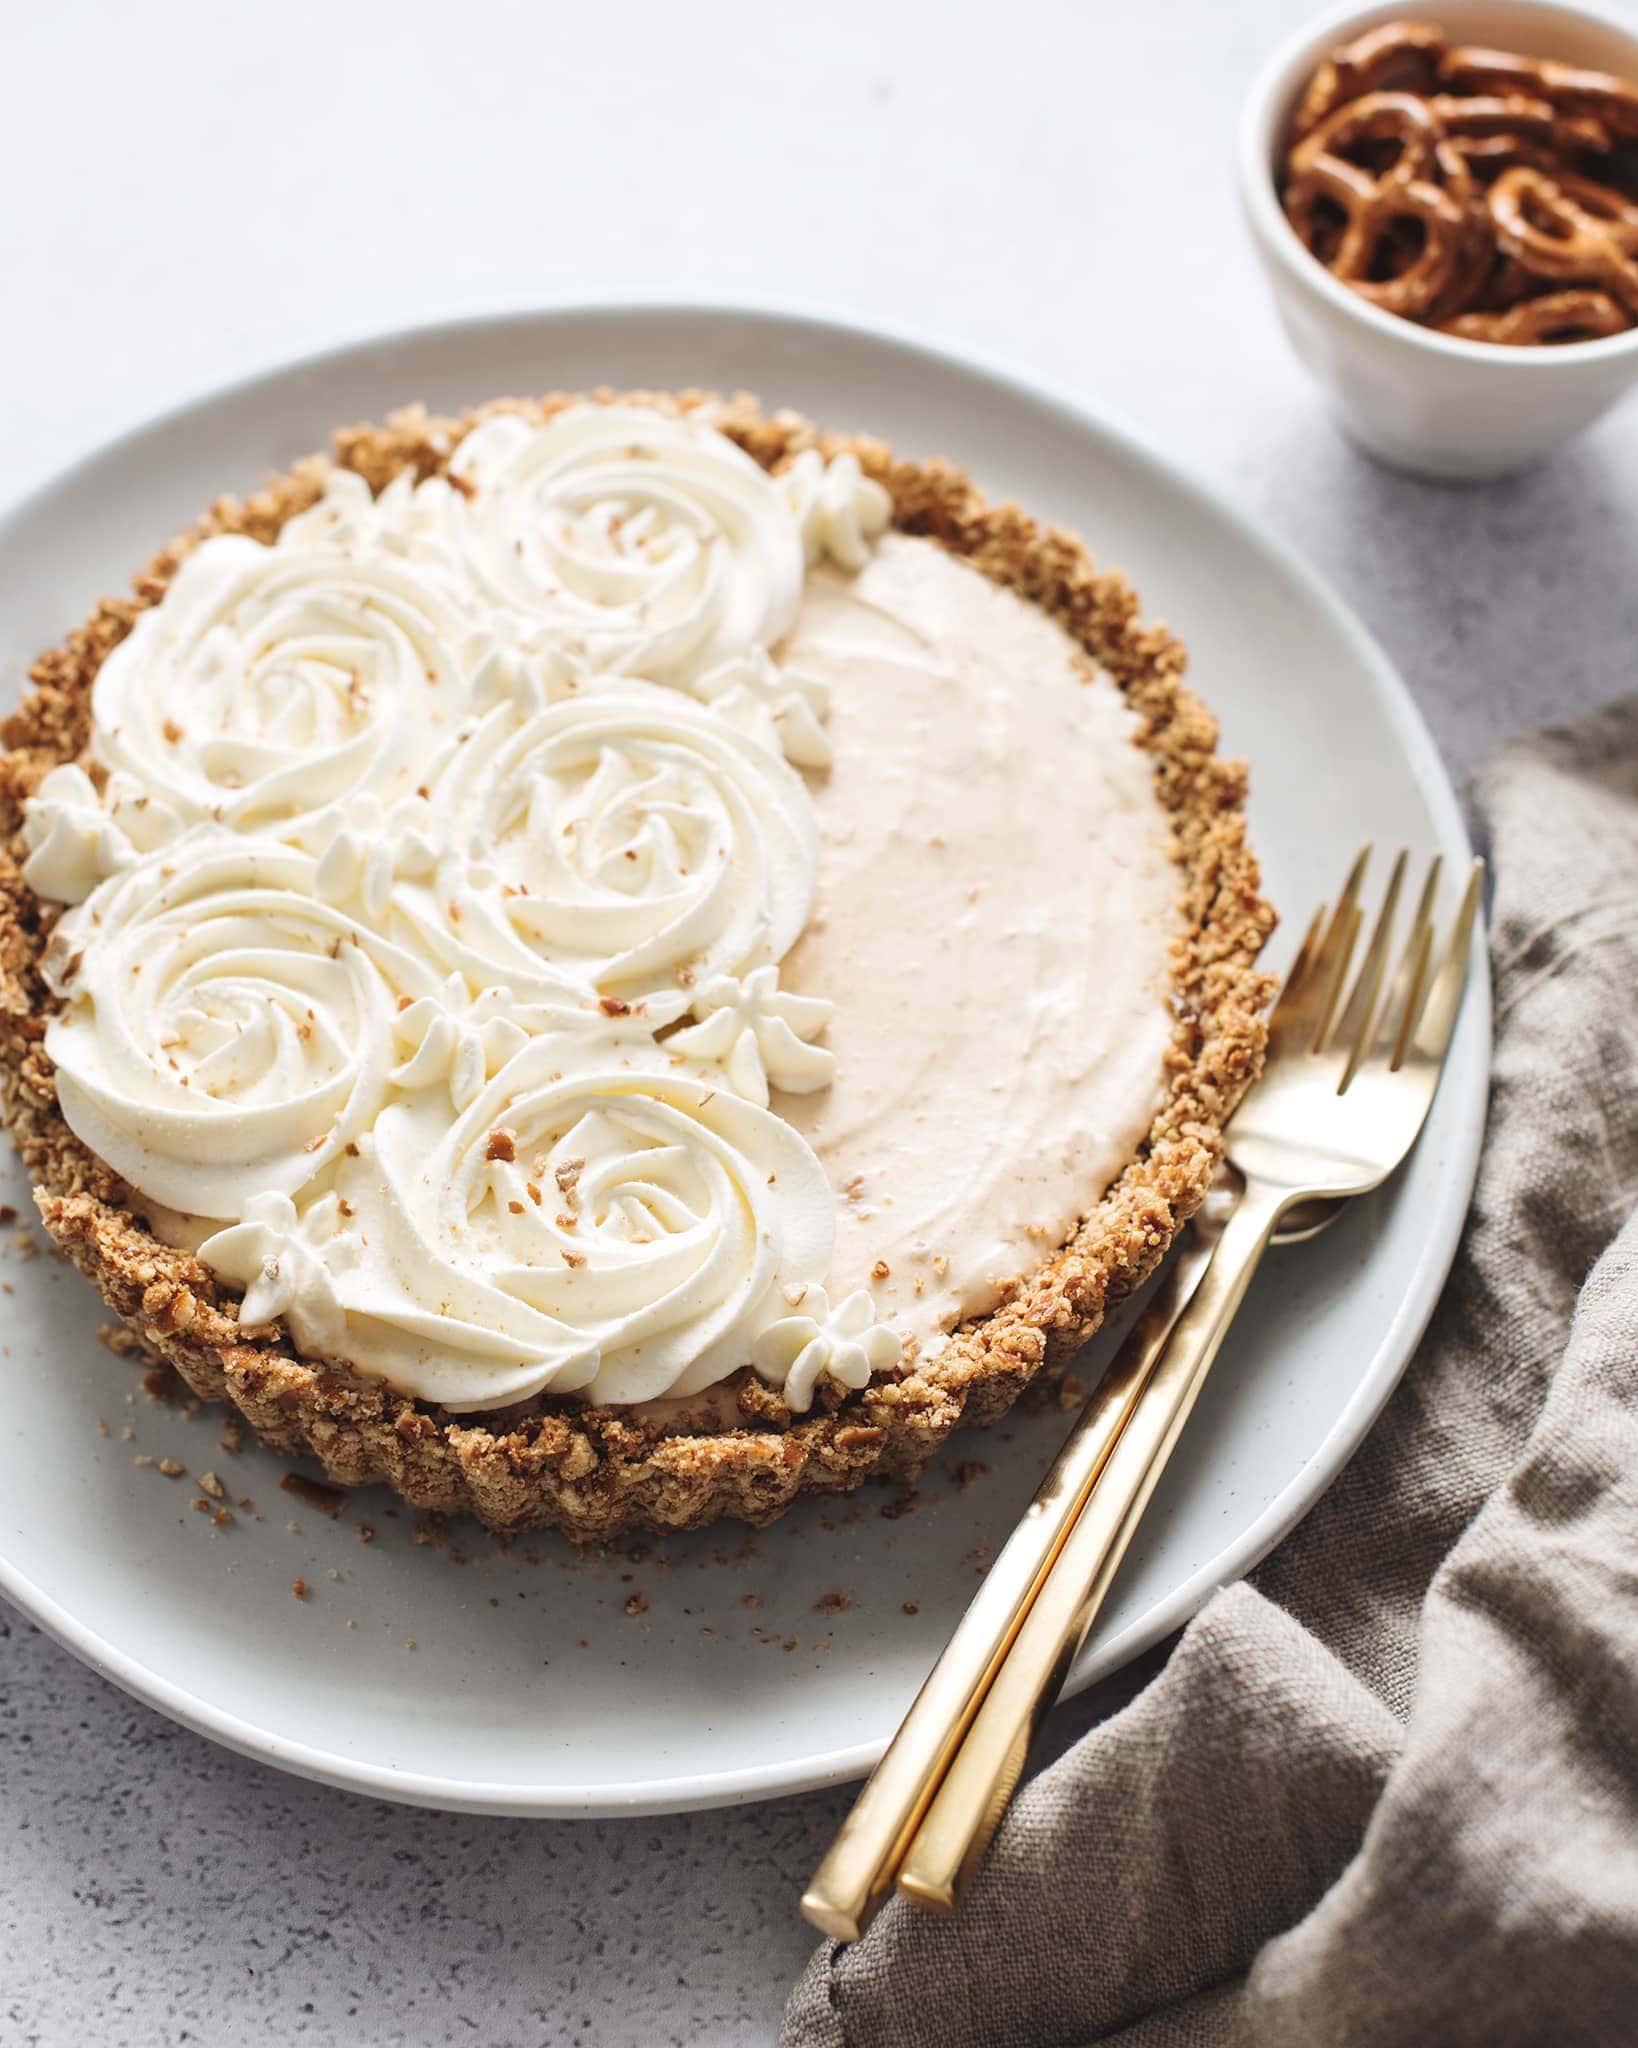 Peanut butter ice cream pie with whipped cream rosettes and brown linen